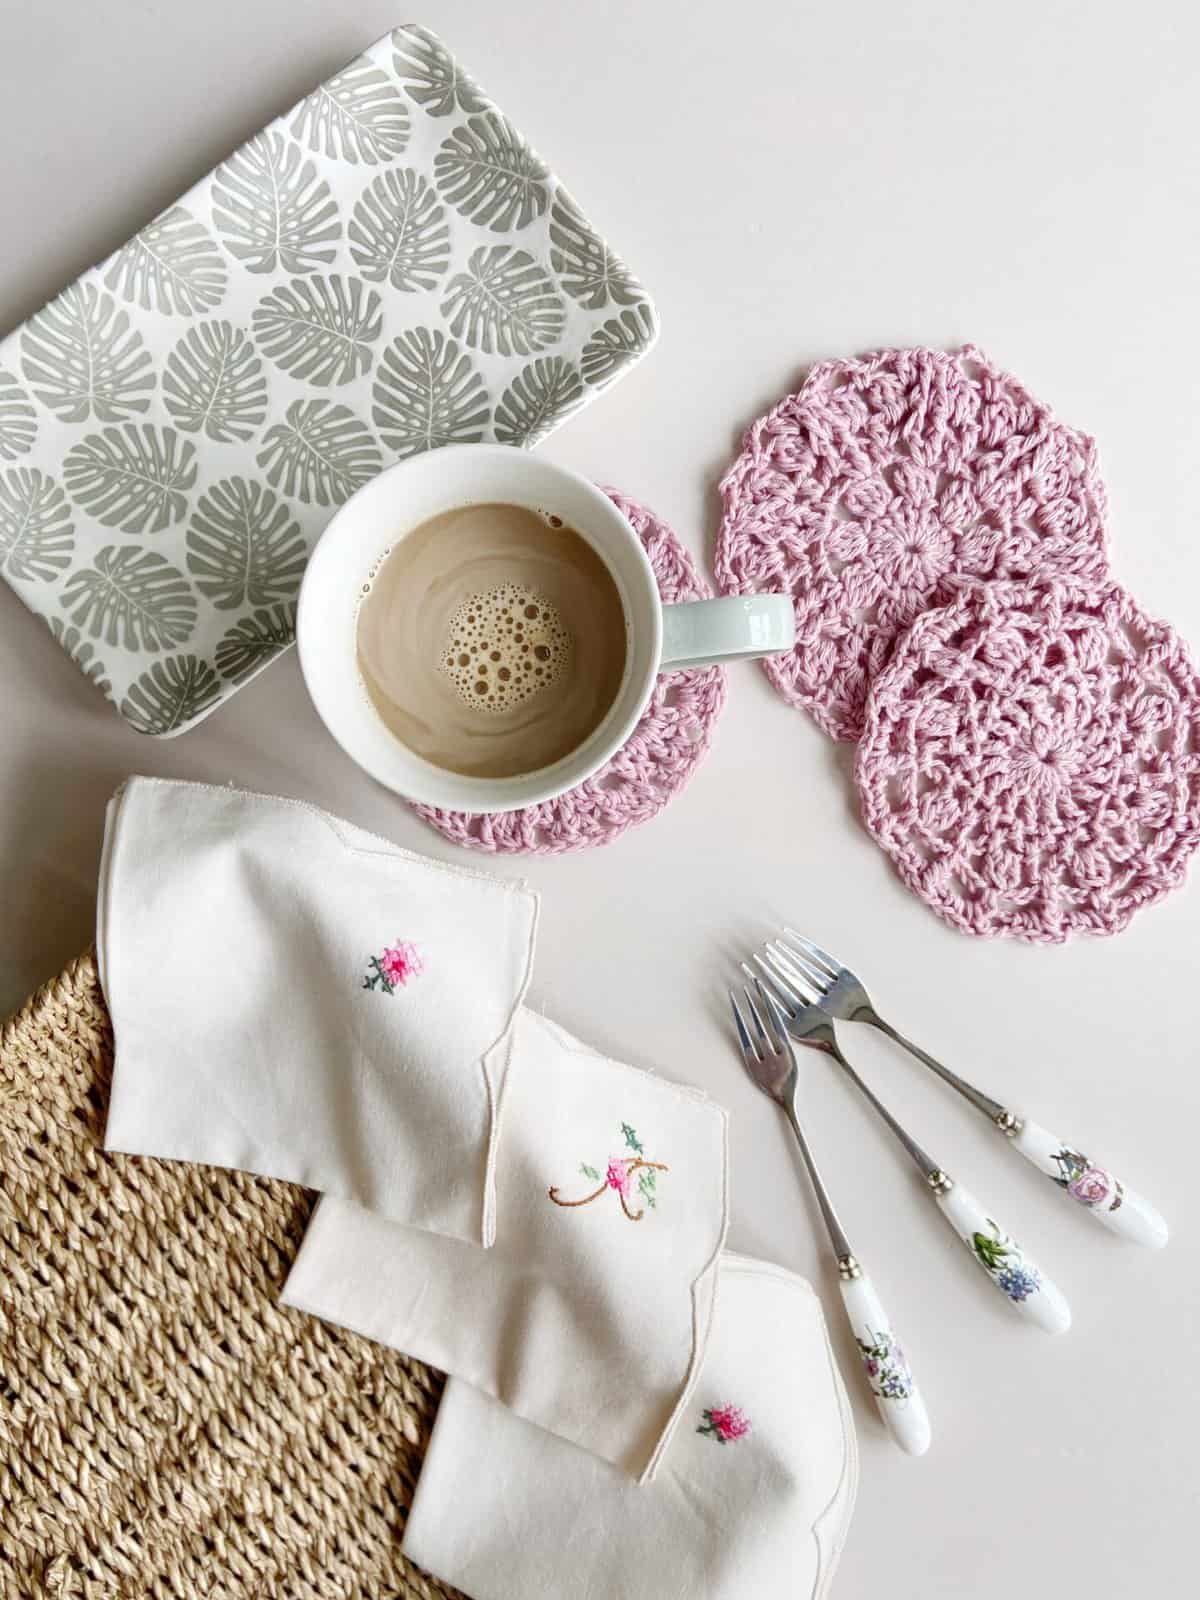 3 lace crochet coasters with napkins and cake forks and coffee.